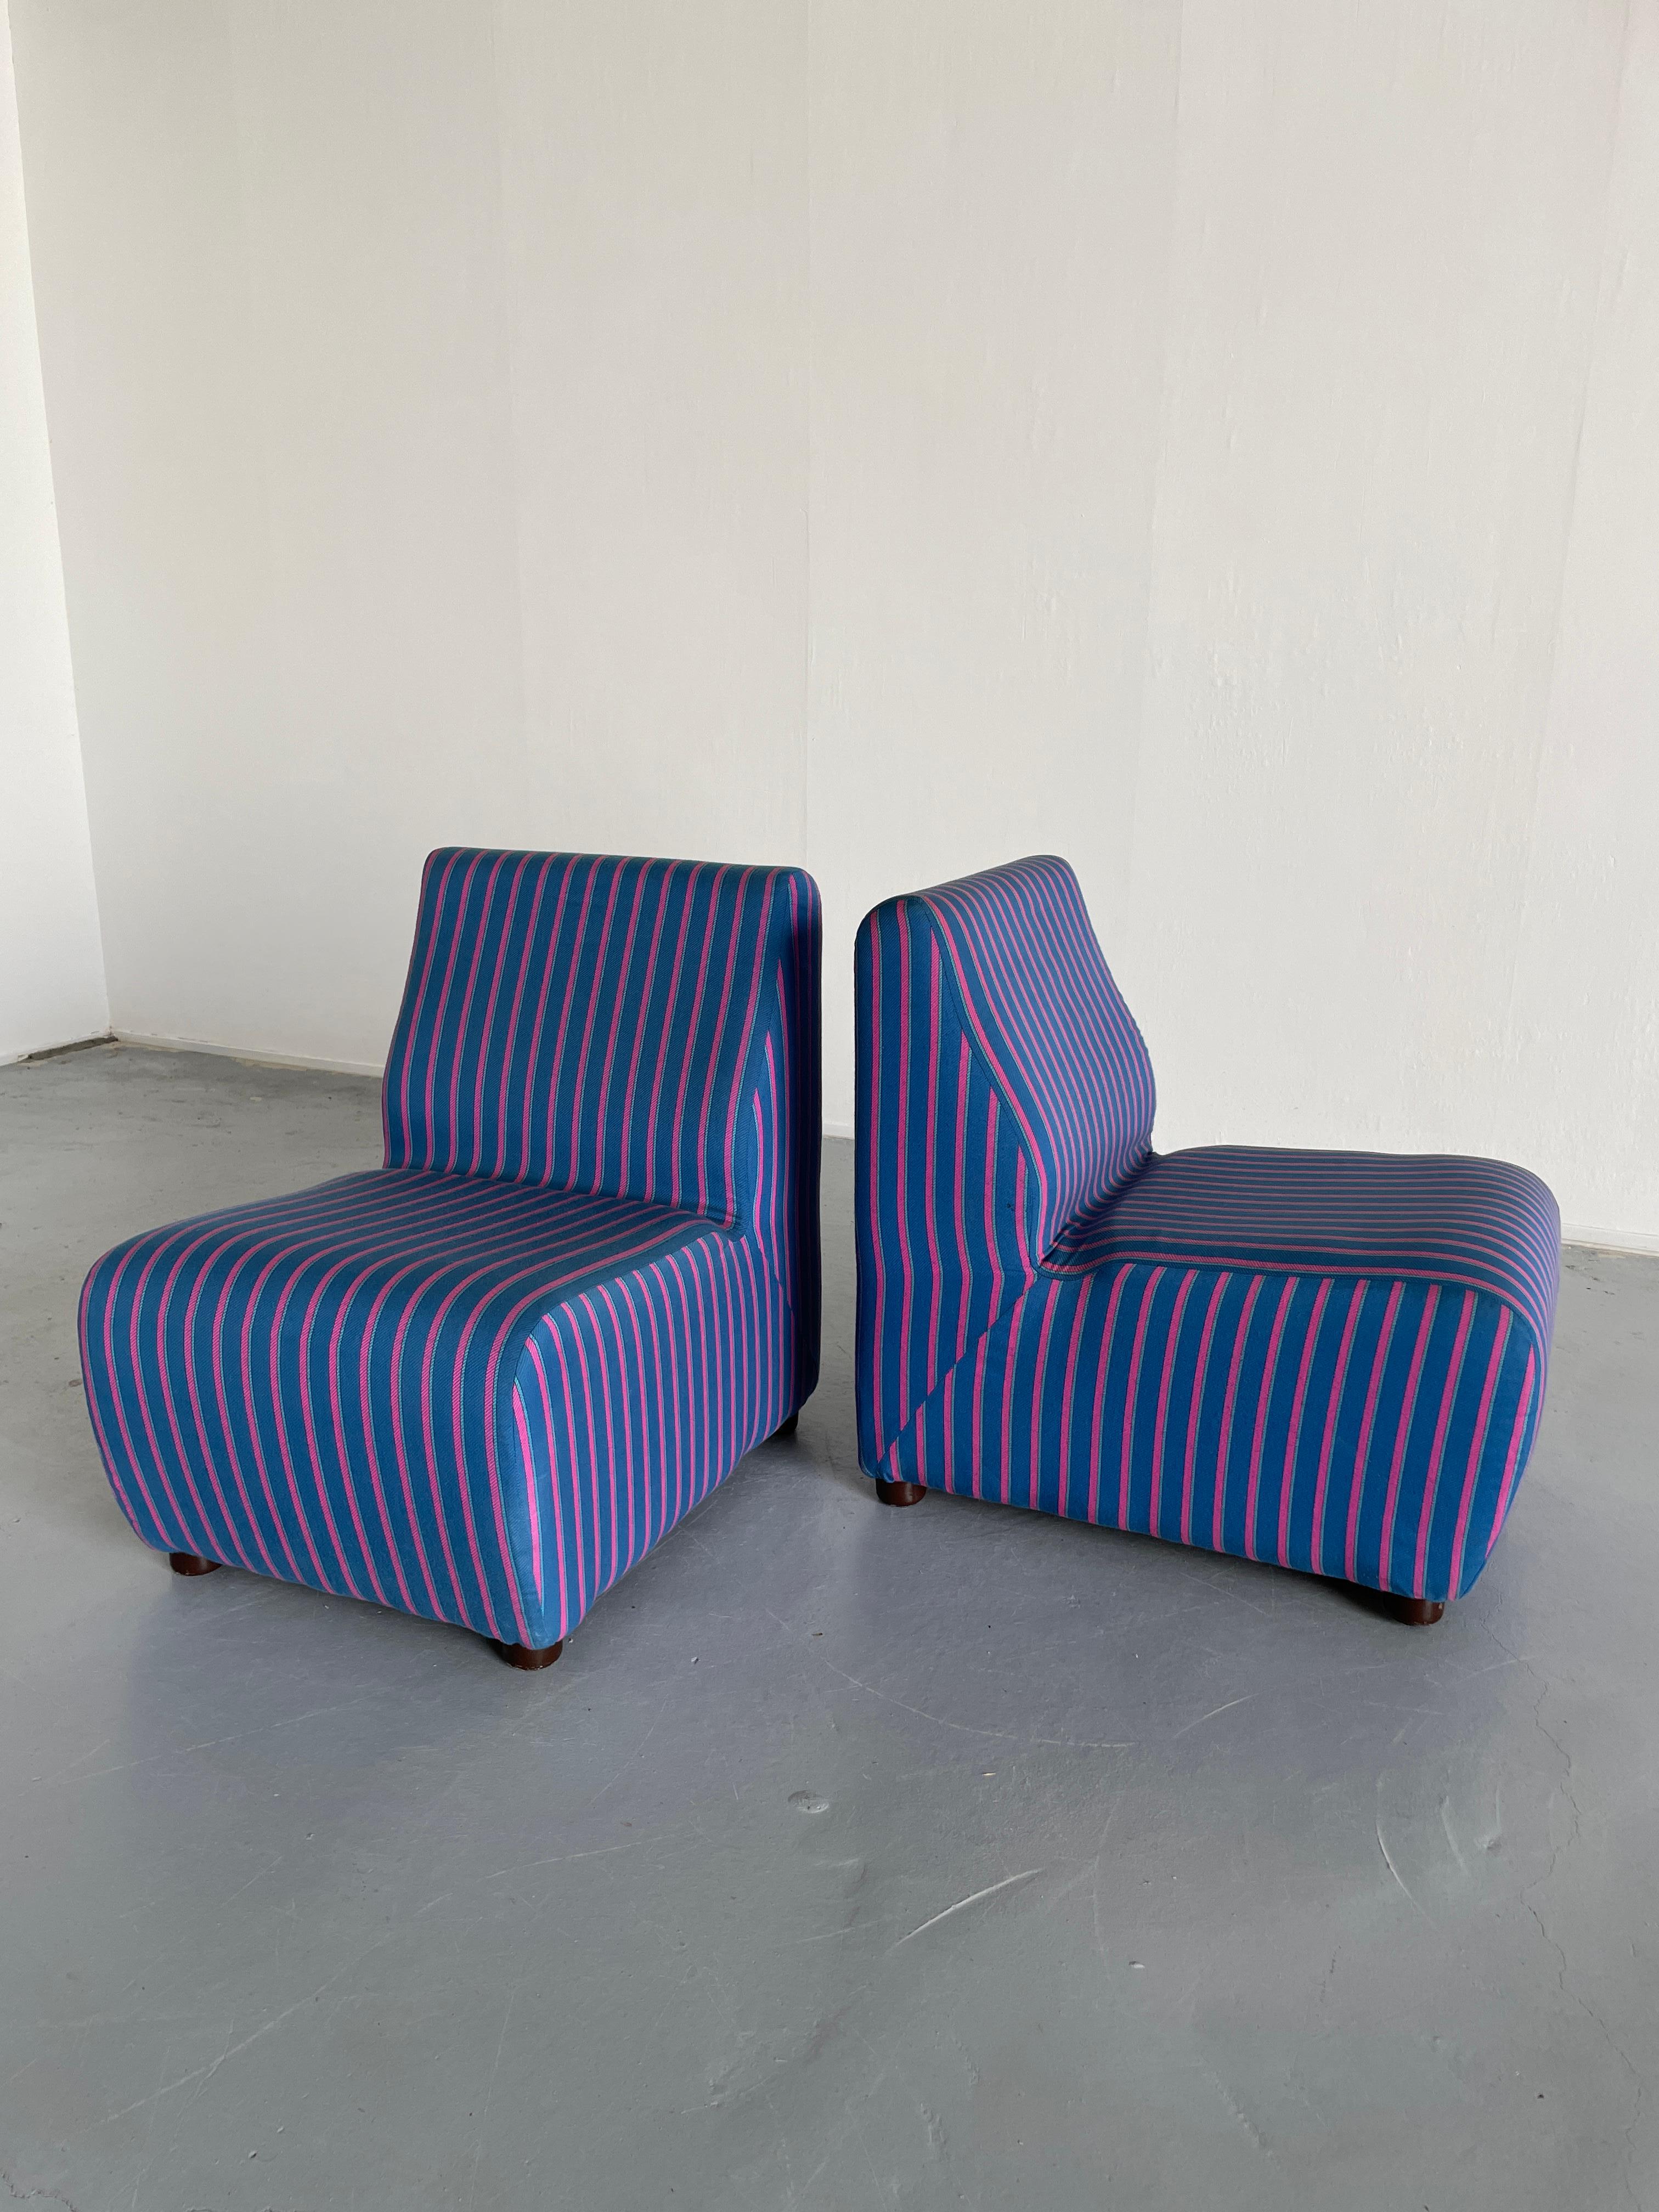 Design your own vintage Italian modular sofa!

A stunning twenty-piece Mid-Century-Modern modular sofa in blue striped upholstery. With modules sold per piece, you can create your own modular seating sets. Made from moulded foam and a metal